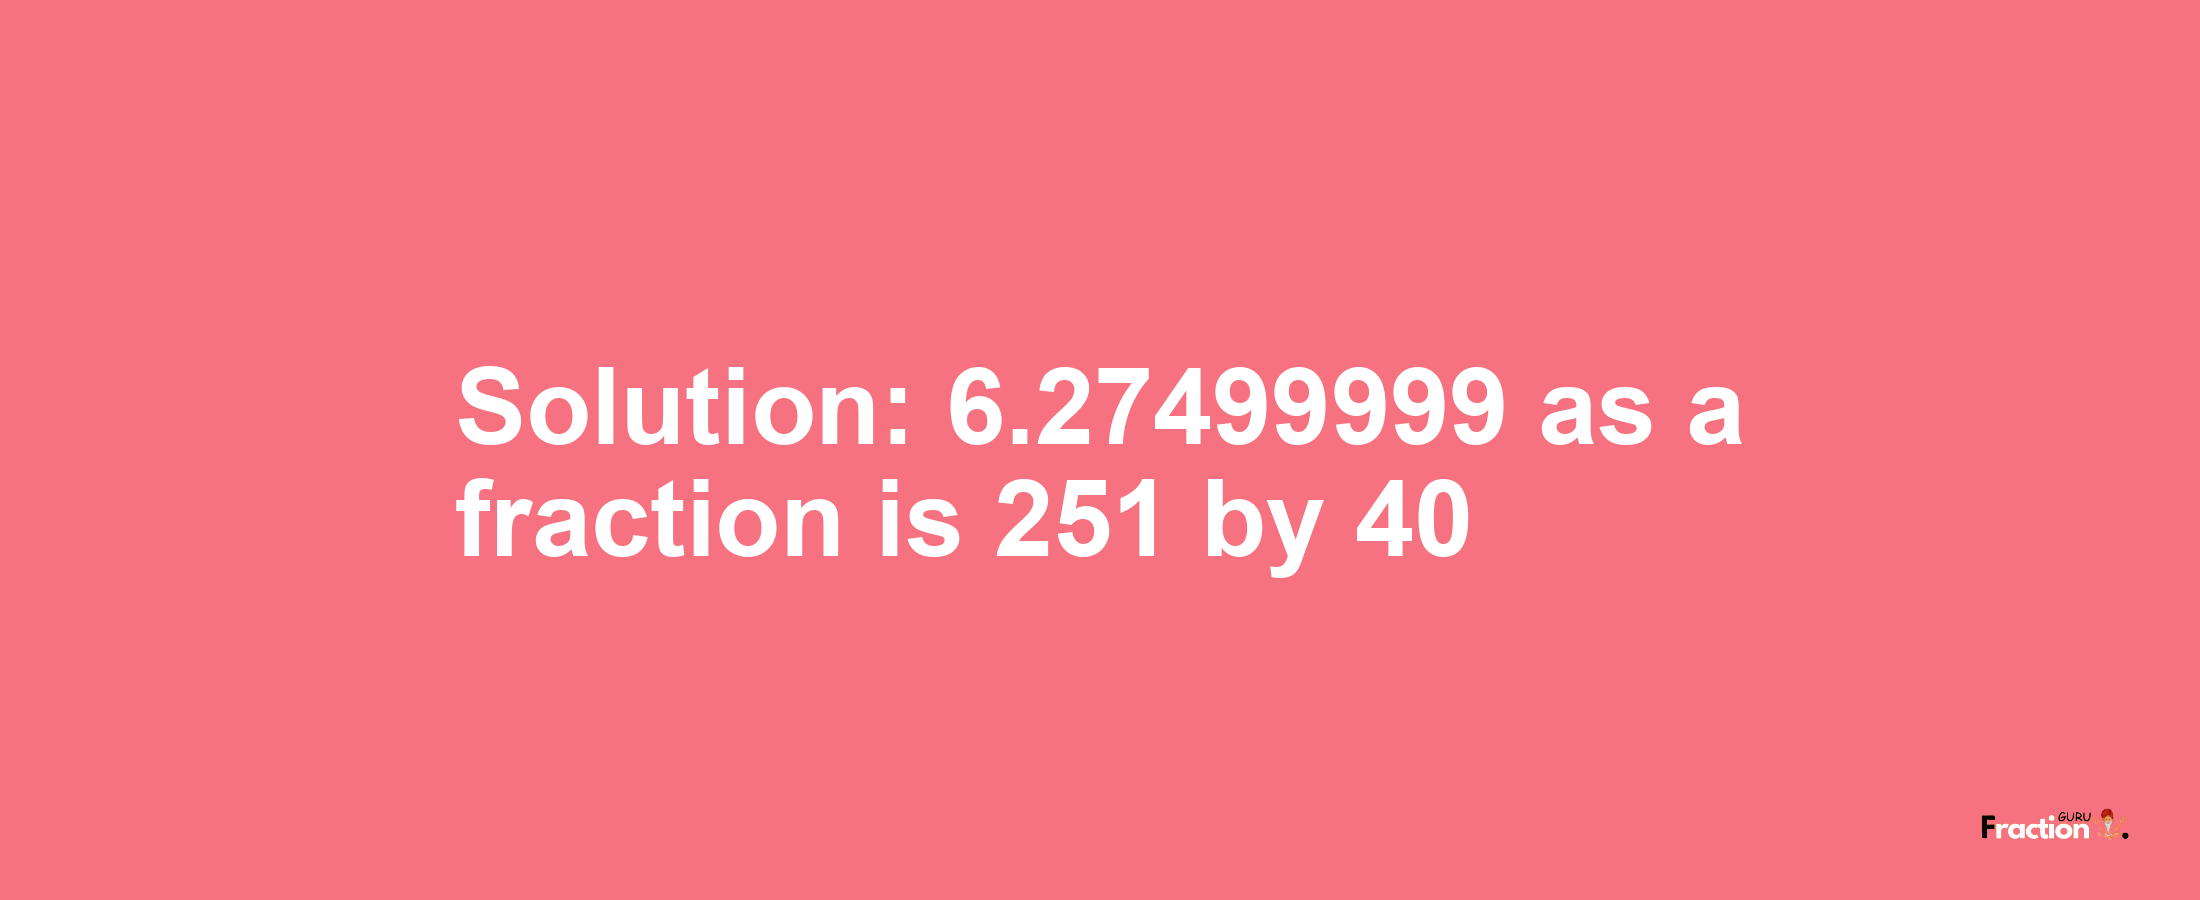 Solution:6.27499999 as a fraction is 251/40